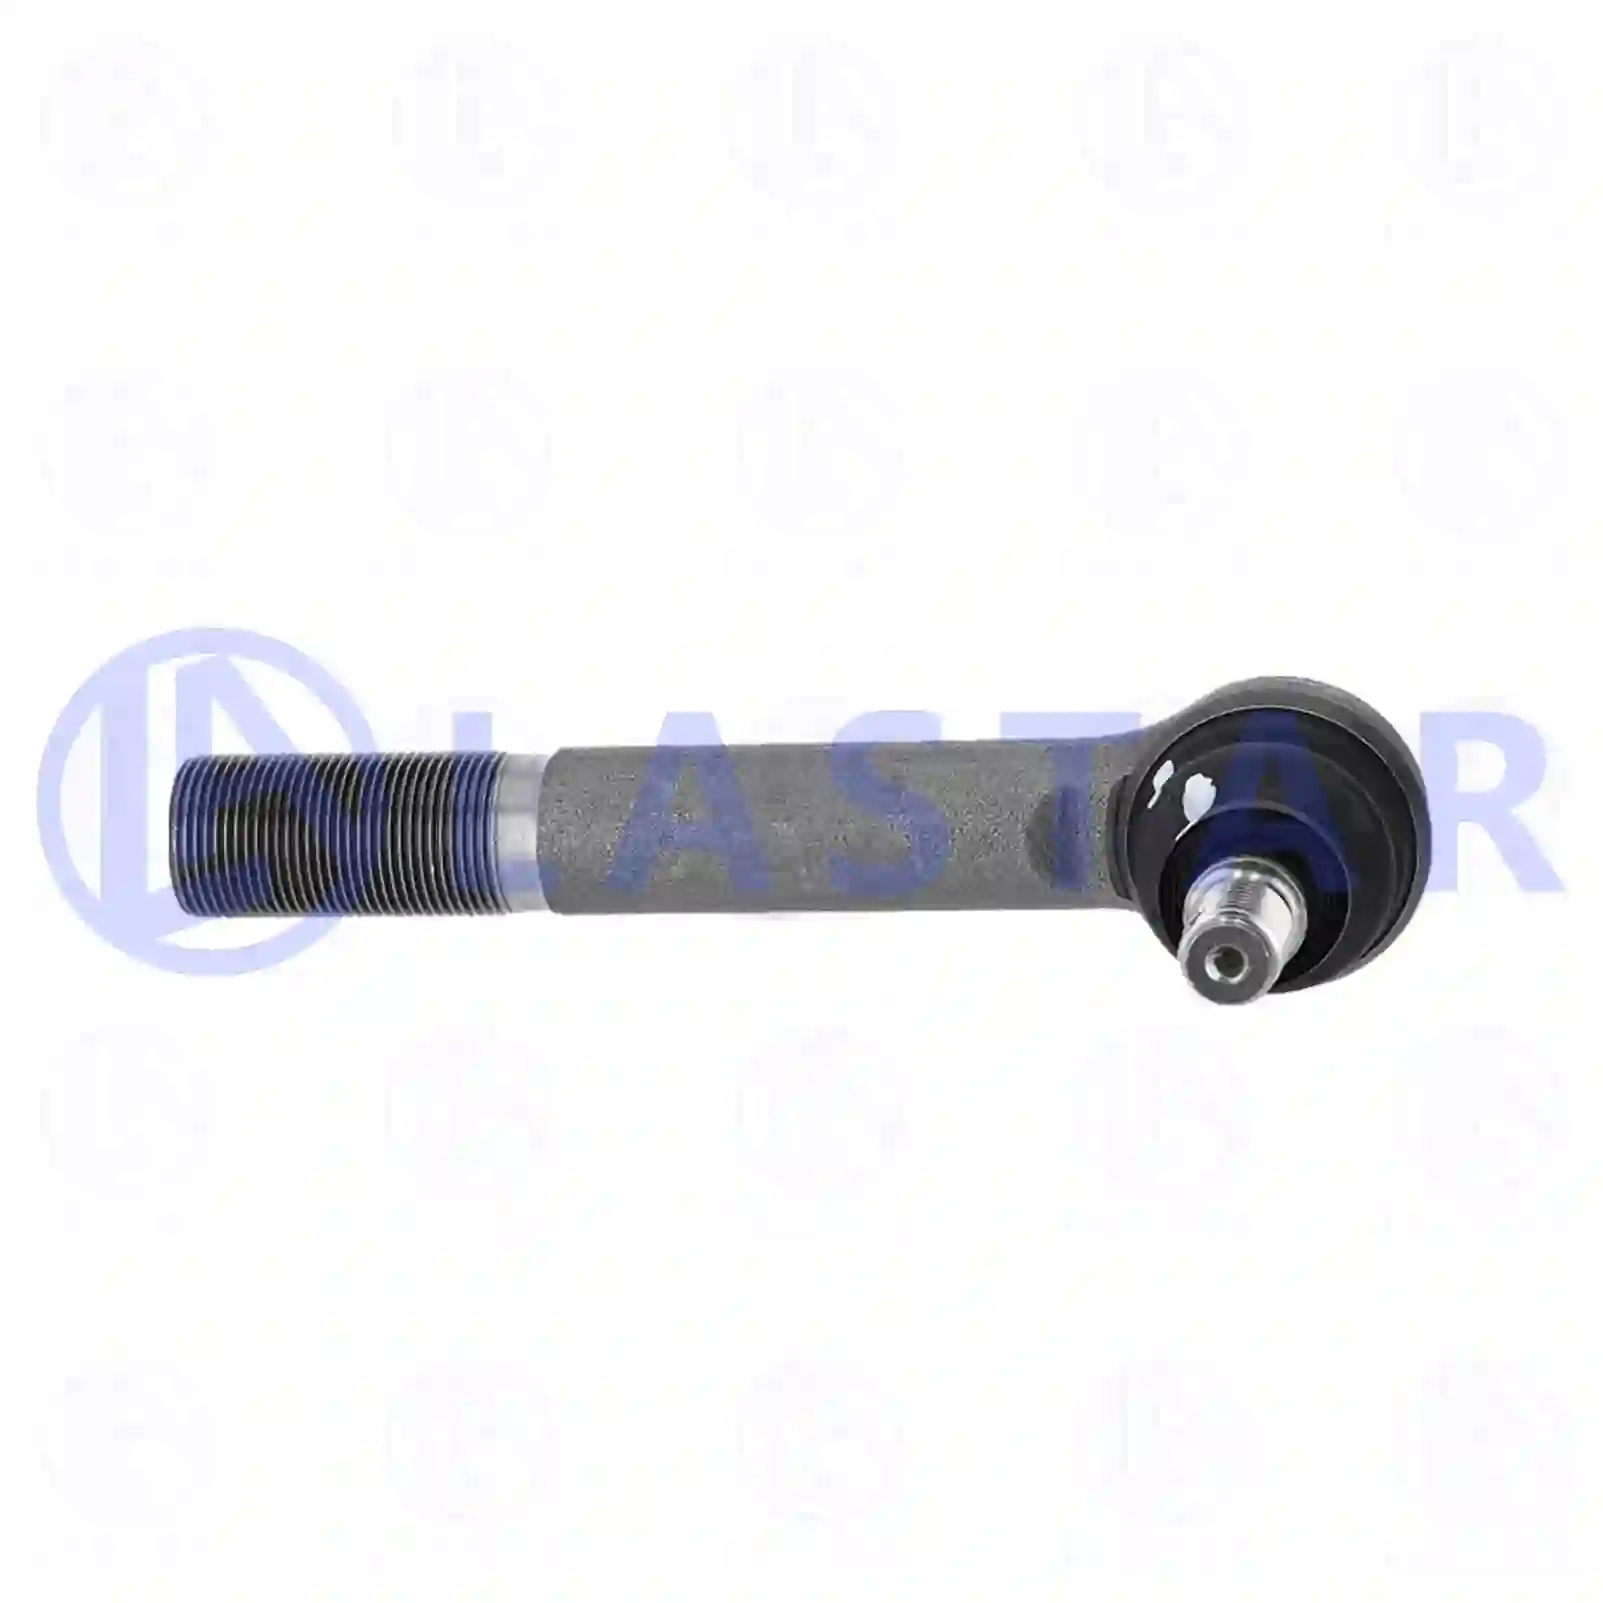 Ball joint, right hand thread, 77705469, 0003300935, 0003307035, , , , ||  77705469 Lastar Spare Part | Truck Spare Parts, Auotomotive Spare Parts Ball joint, right hand thread, 77705469, 0003300935, 0003307035, , , , ||  77705469 Lastar Spare Part | Truck Spare Parts, Auotomotive Spare Parts